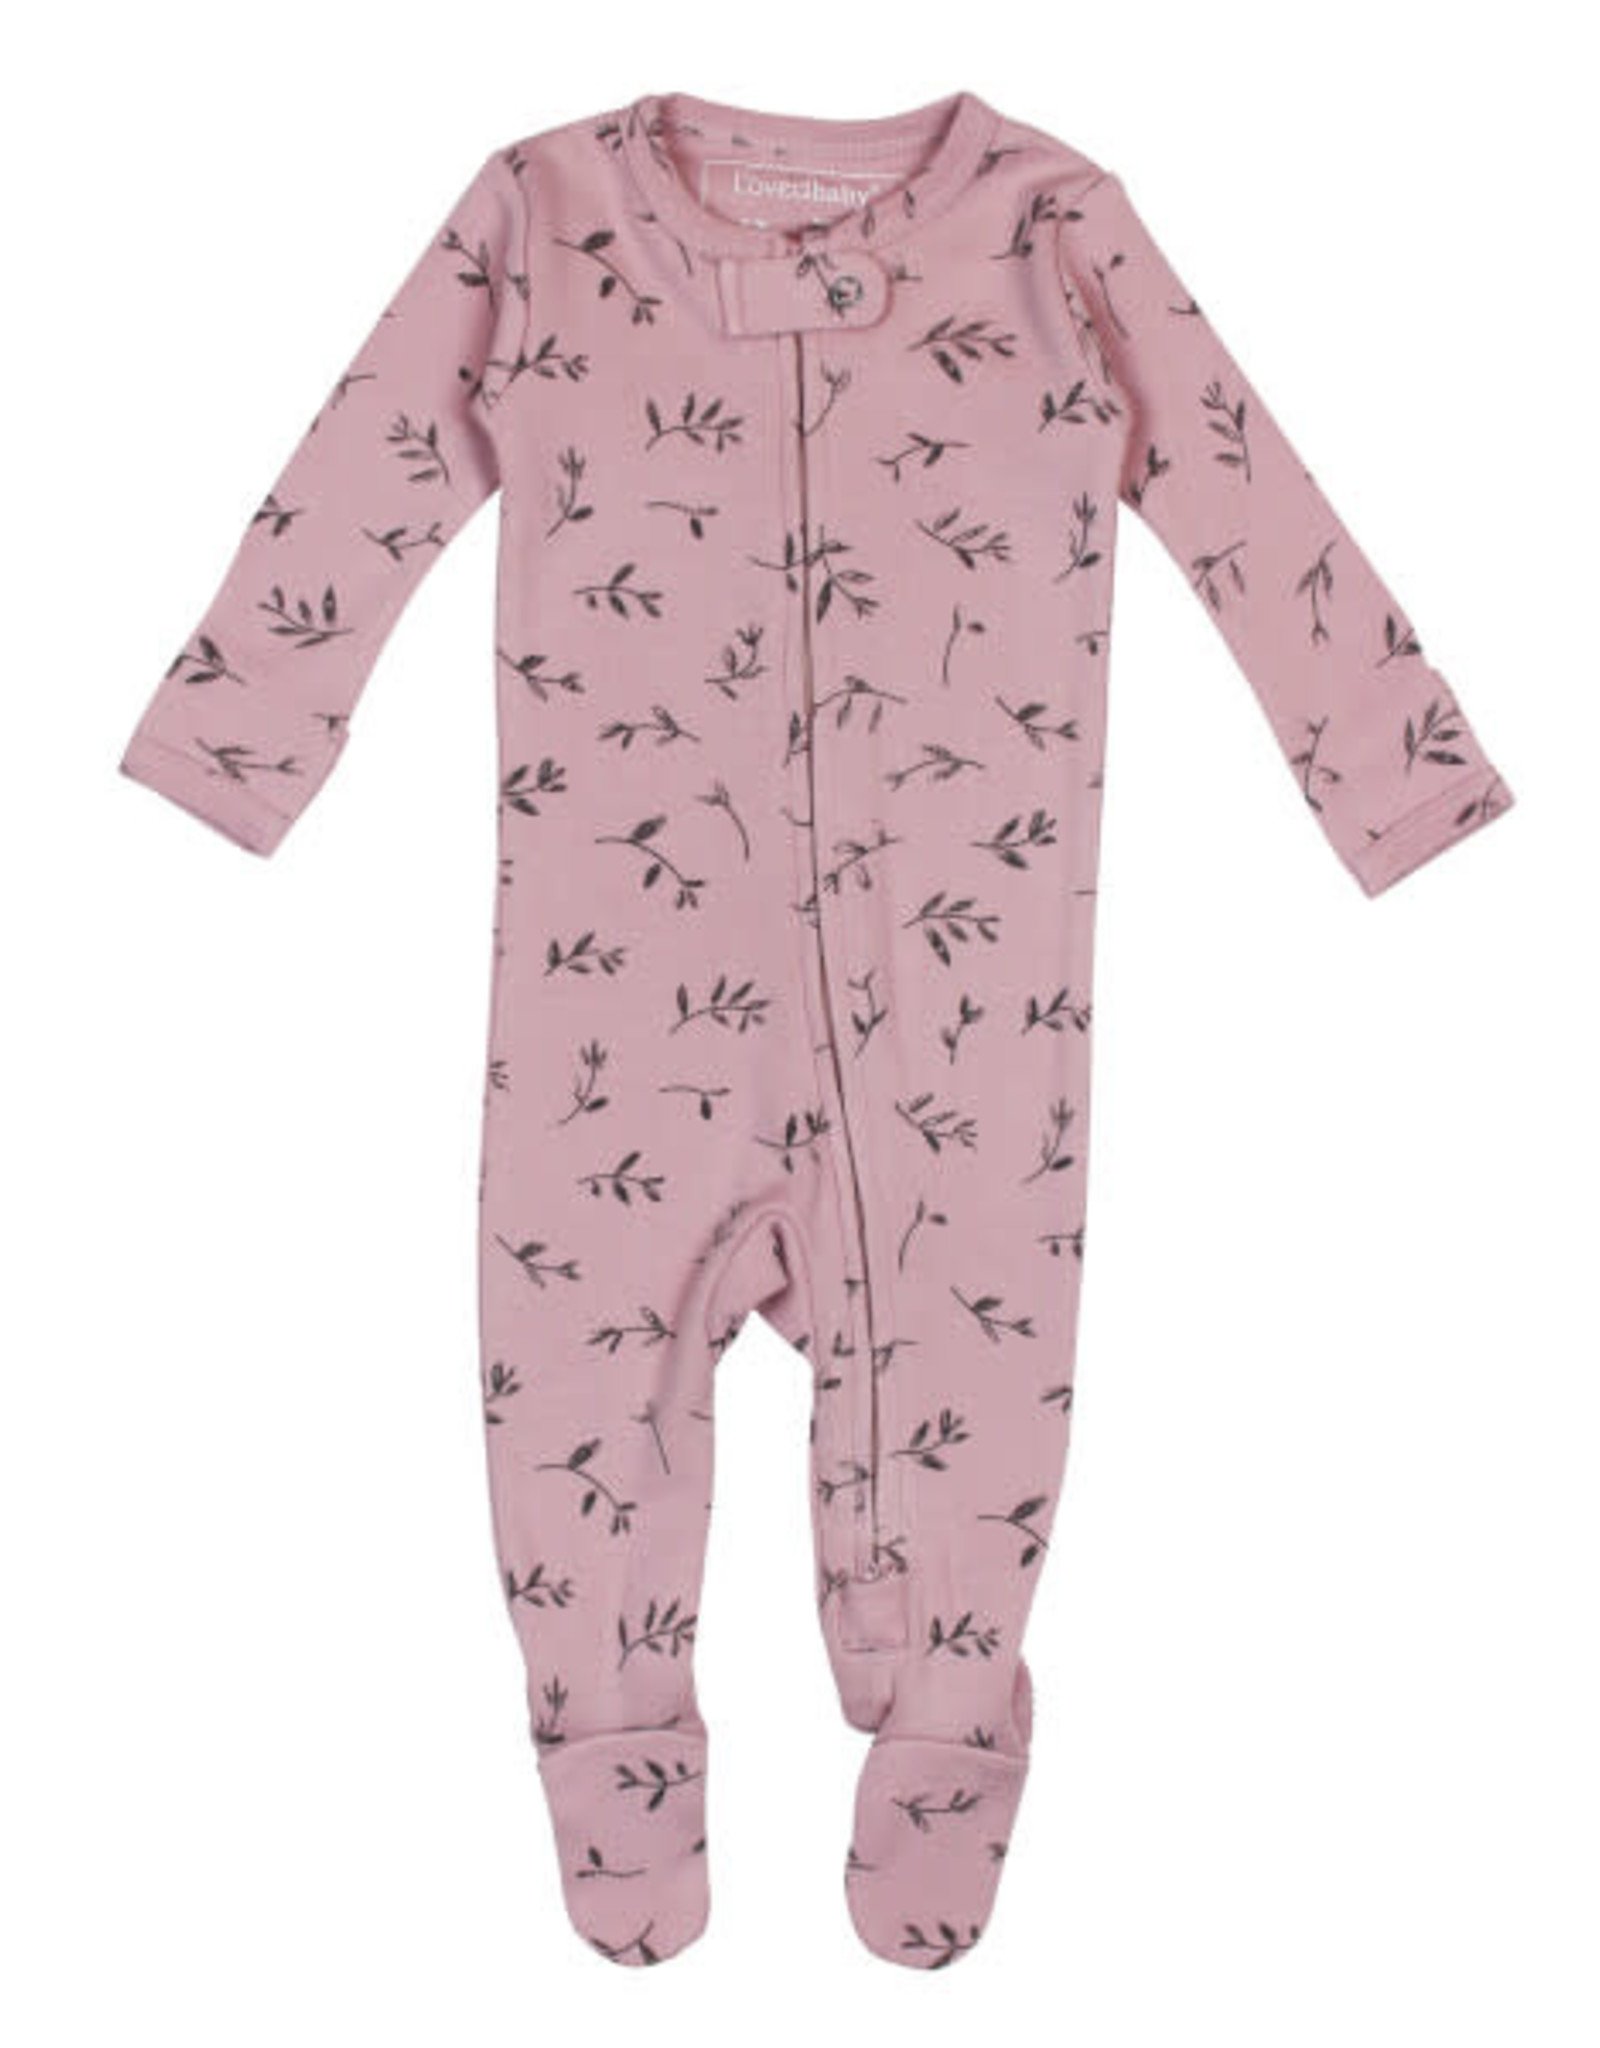 L'oved Baby Zipper Footie Blossom Flower